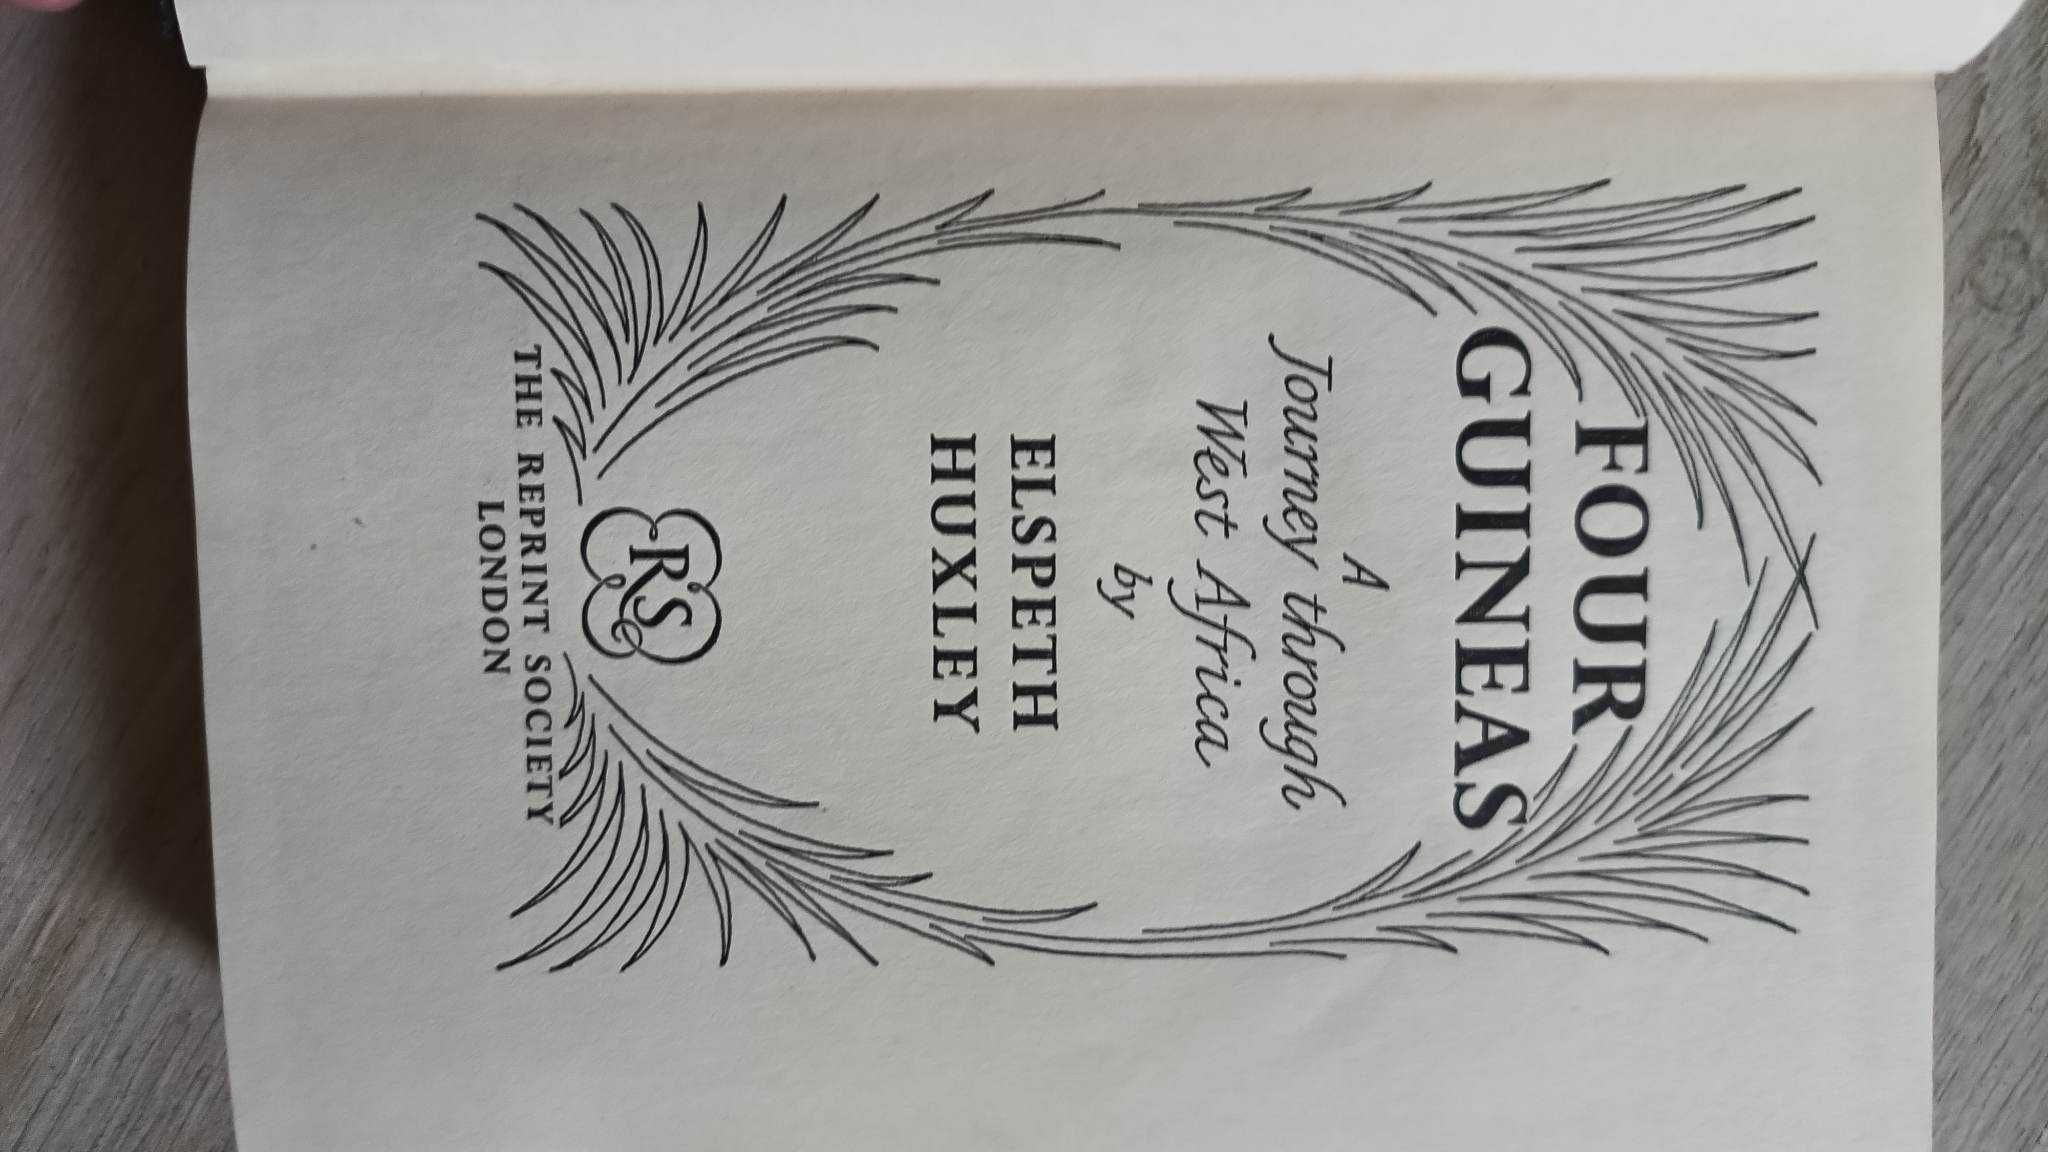 Four Guineas A Journey Through West Africa by Elspeth Huxley 1955